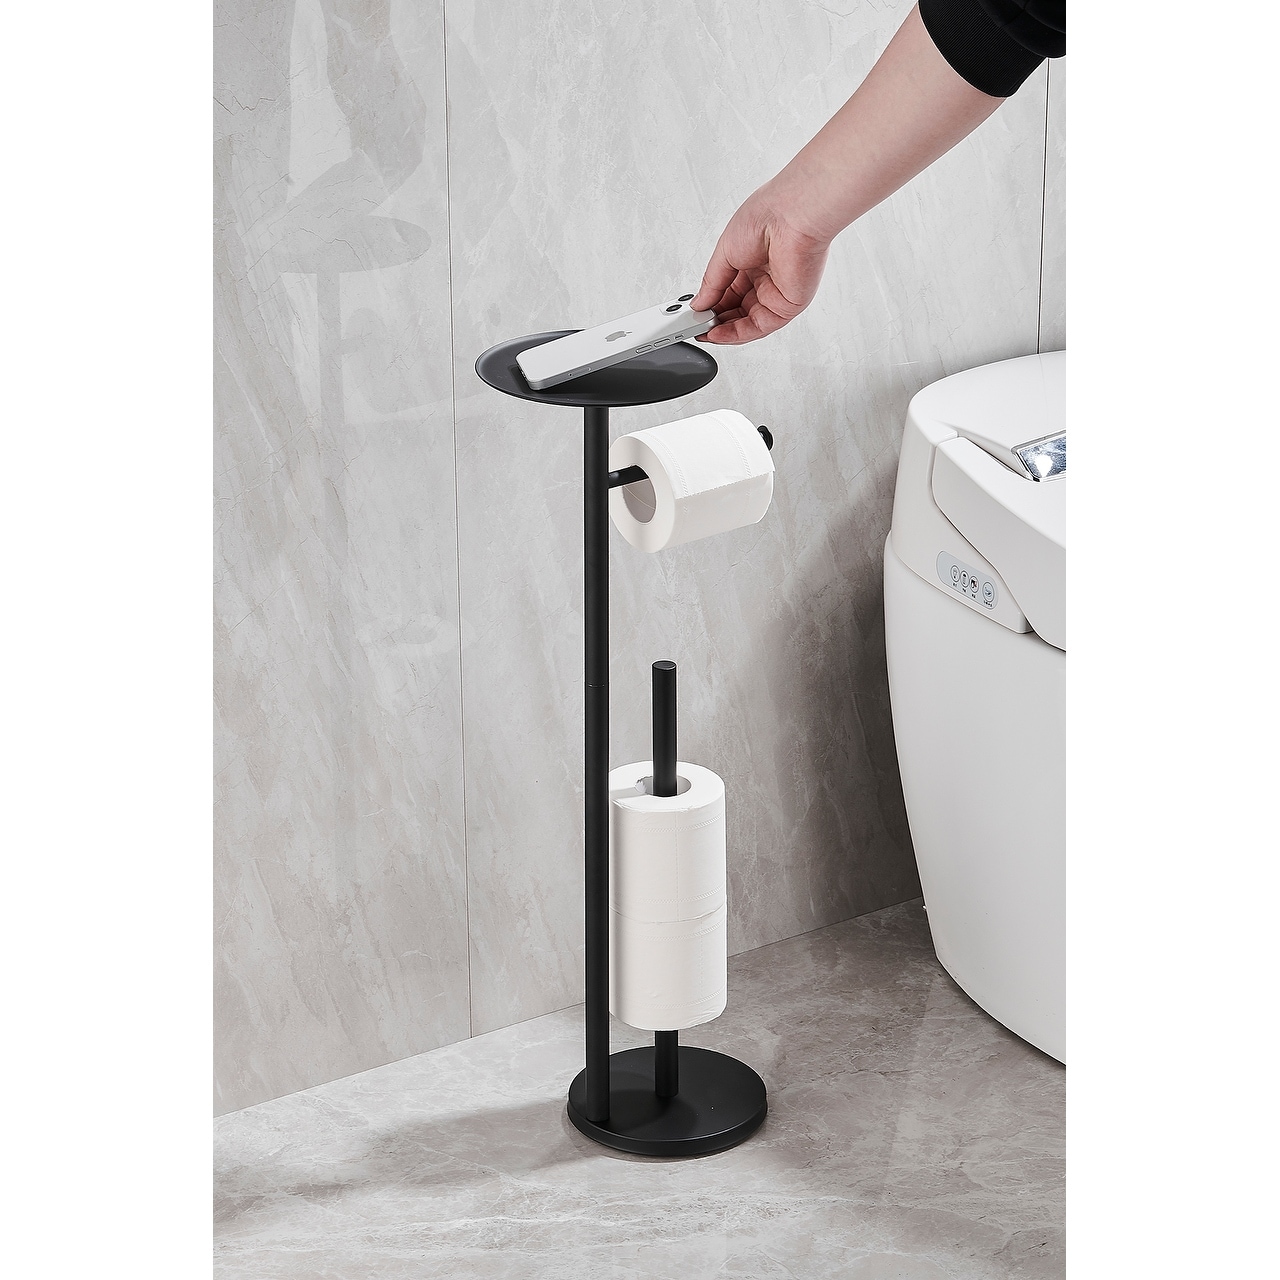 Freestanding Toilet Paper Holder Stand - On Sale - Bed Bath